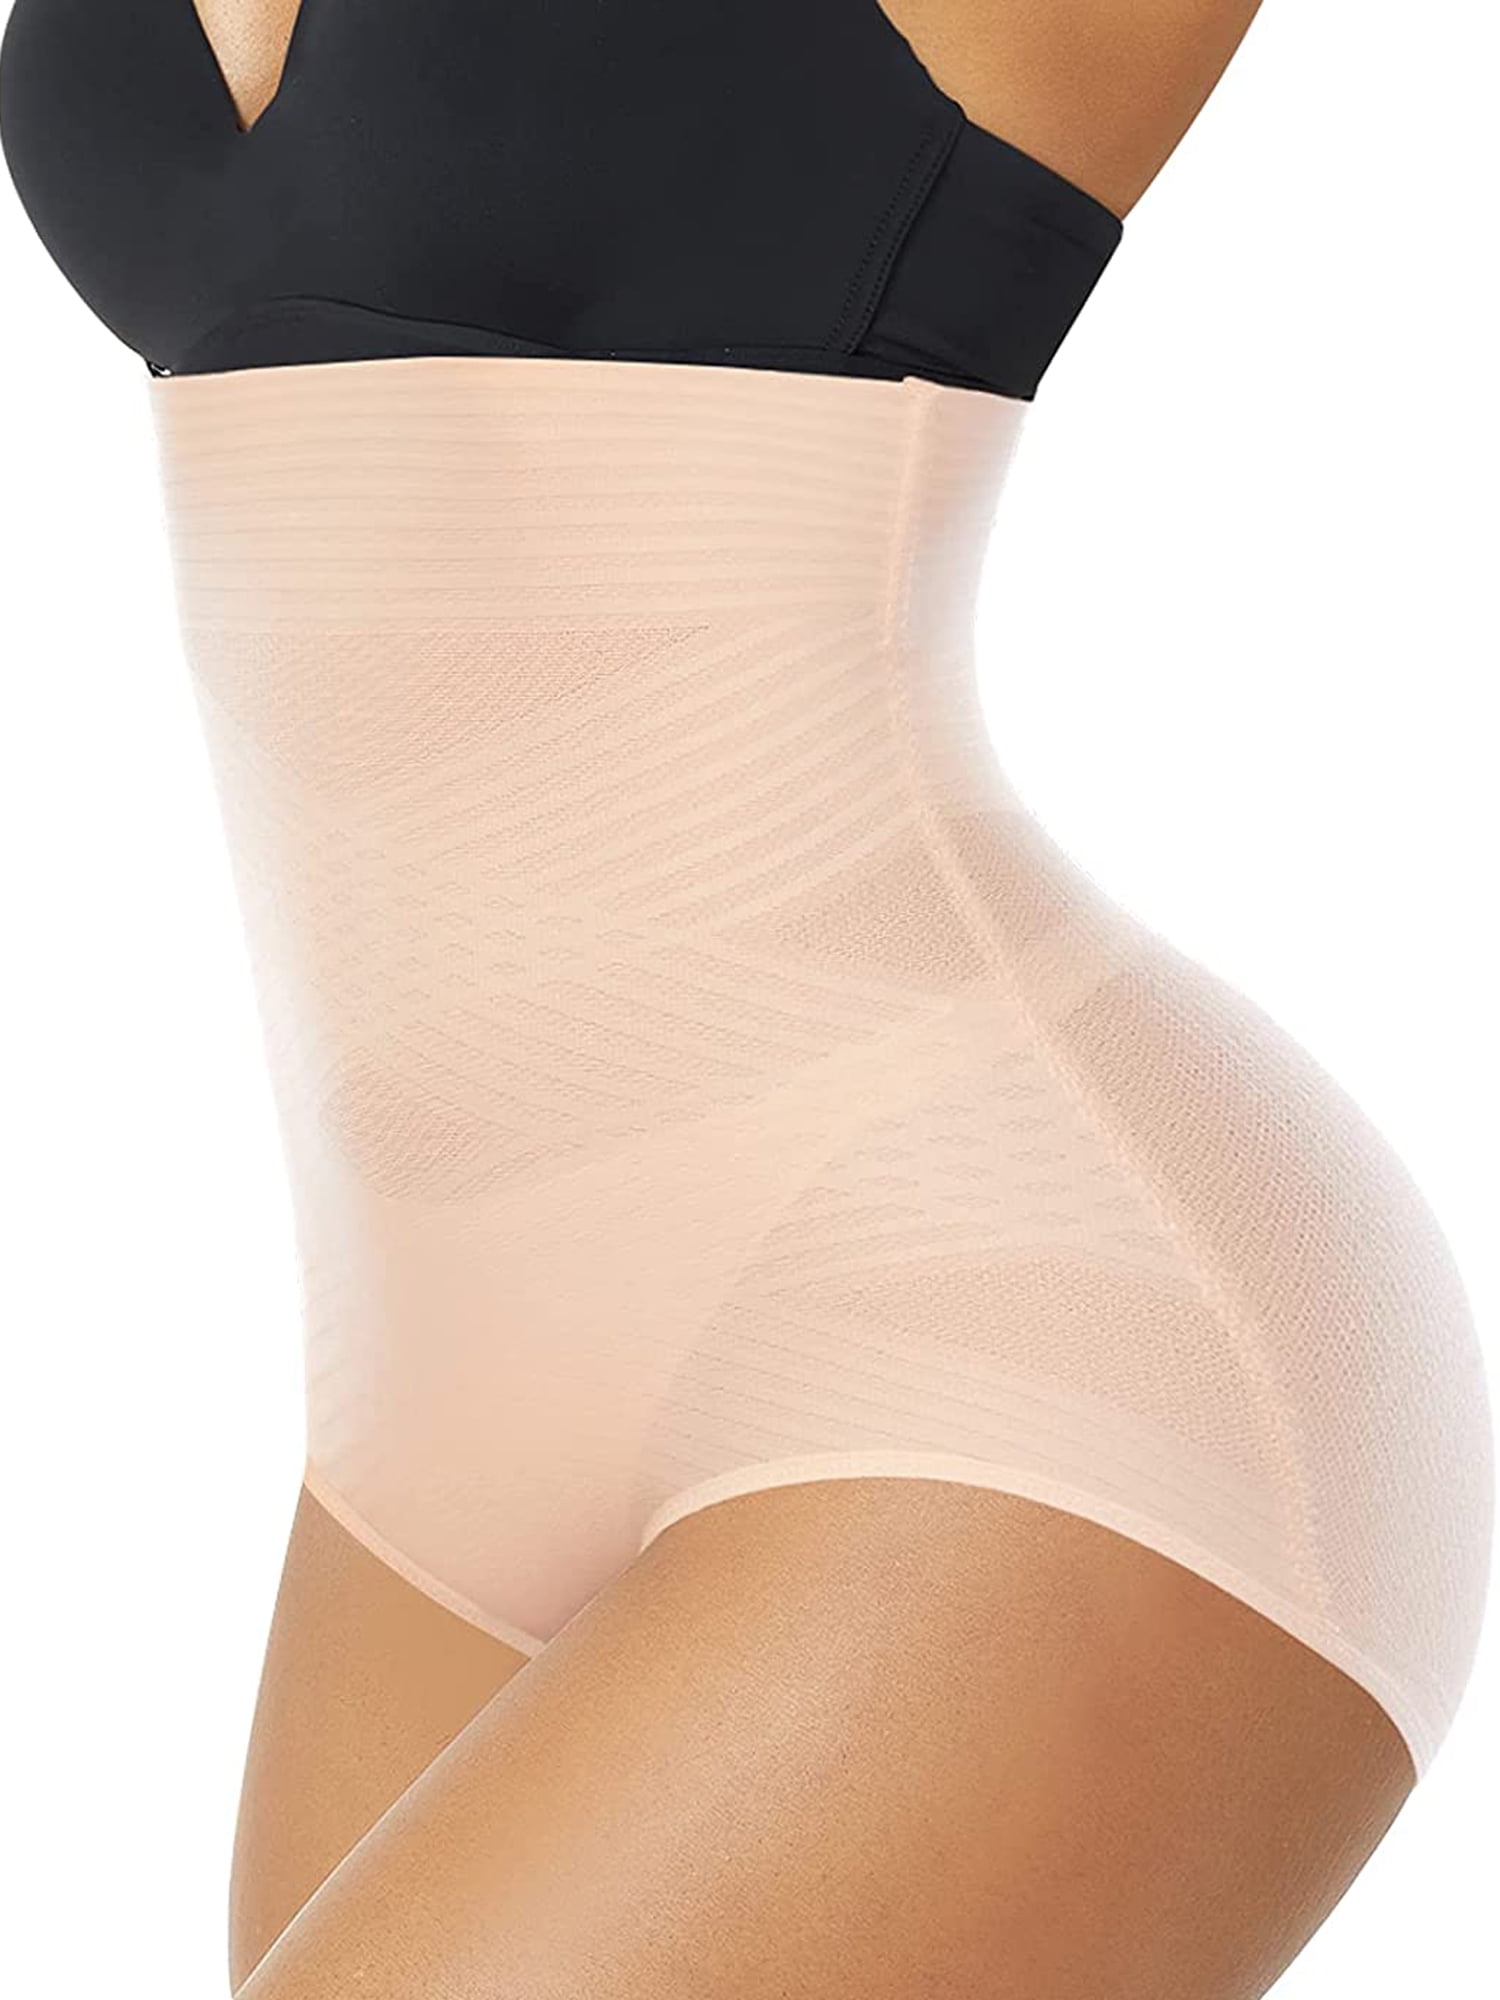 Details about   Shaperin High Waisted Body Shaper Shorts Slim Shapewear for Women Plus-Size